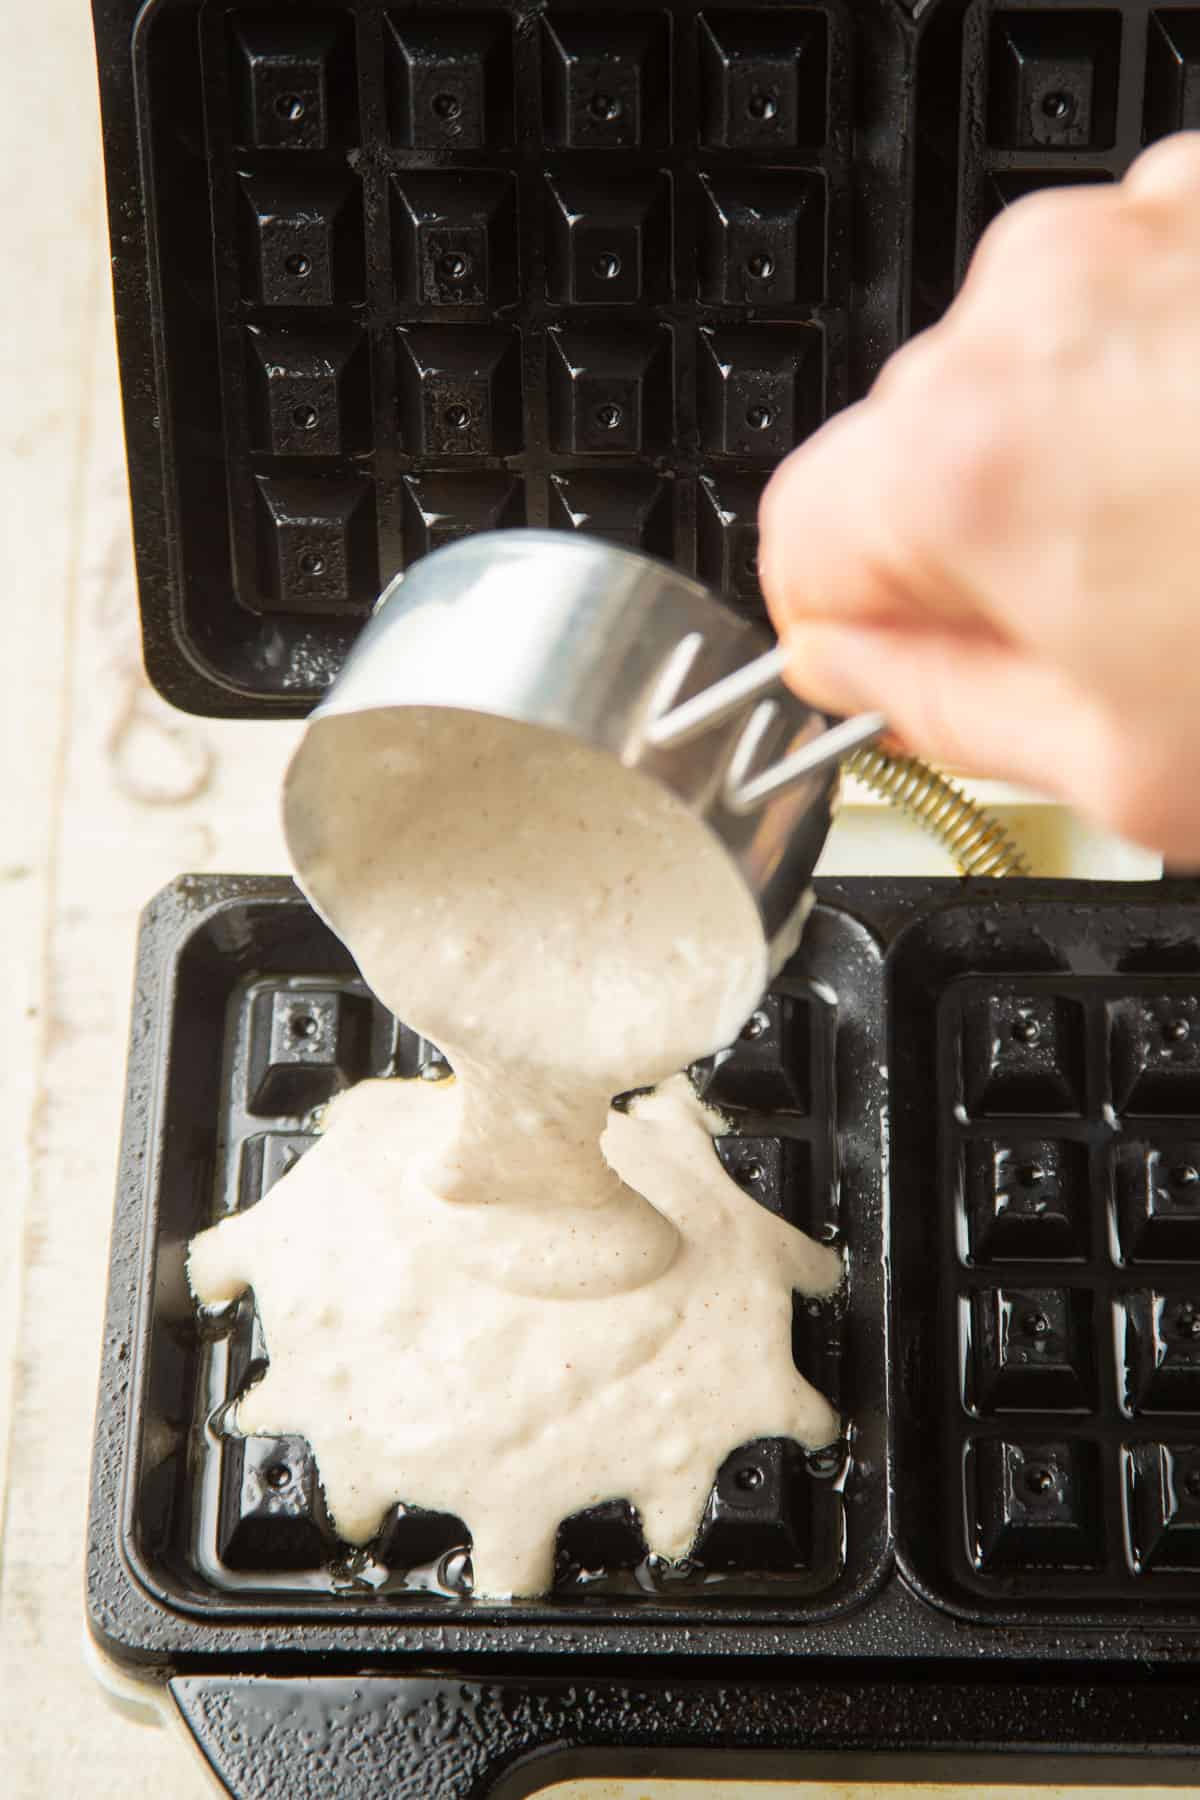 Hand pour waffles batter into a waffle iron.